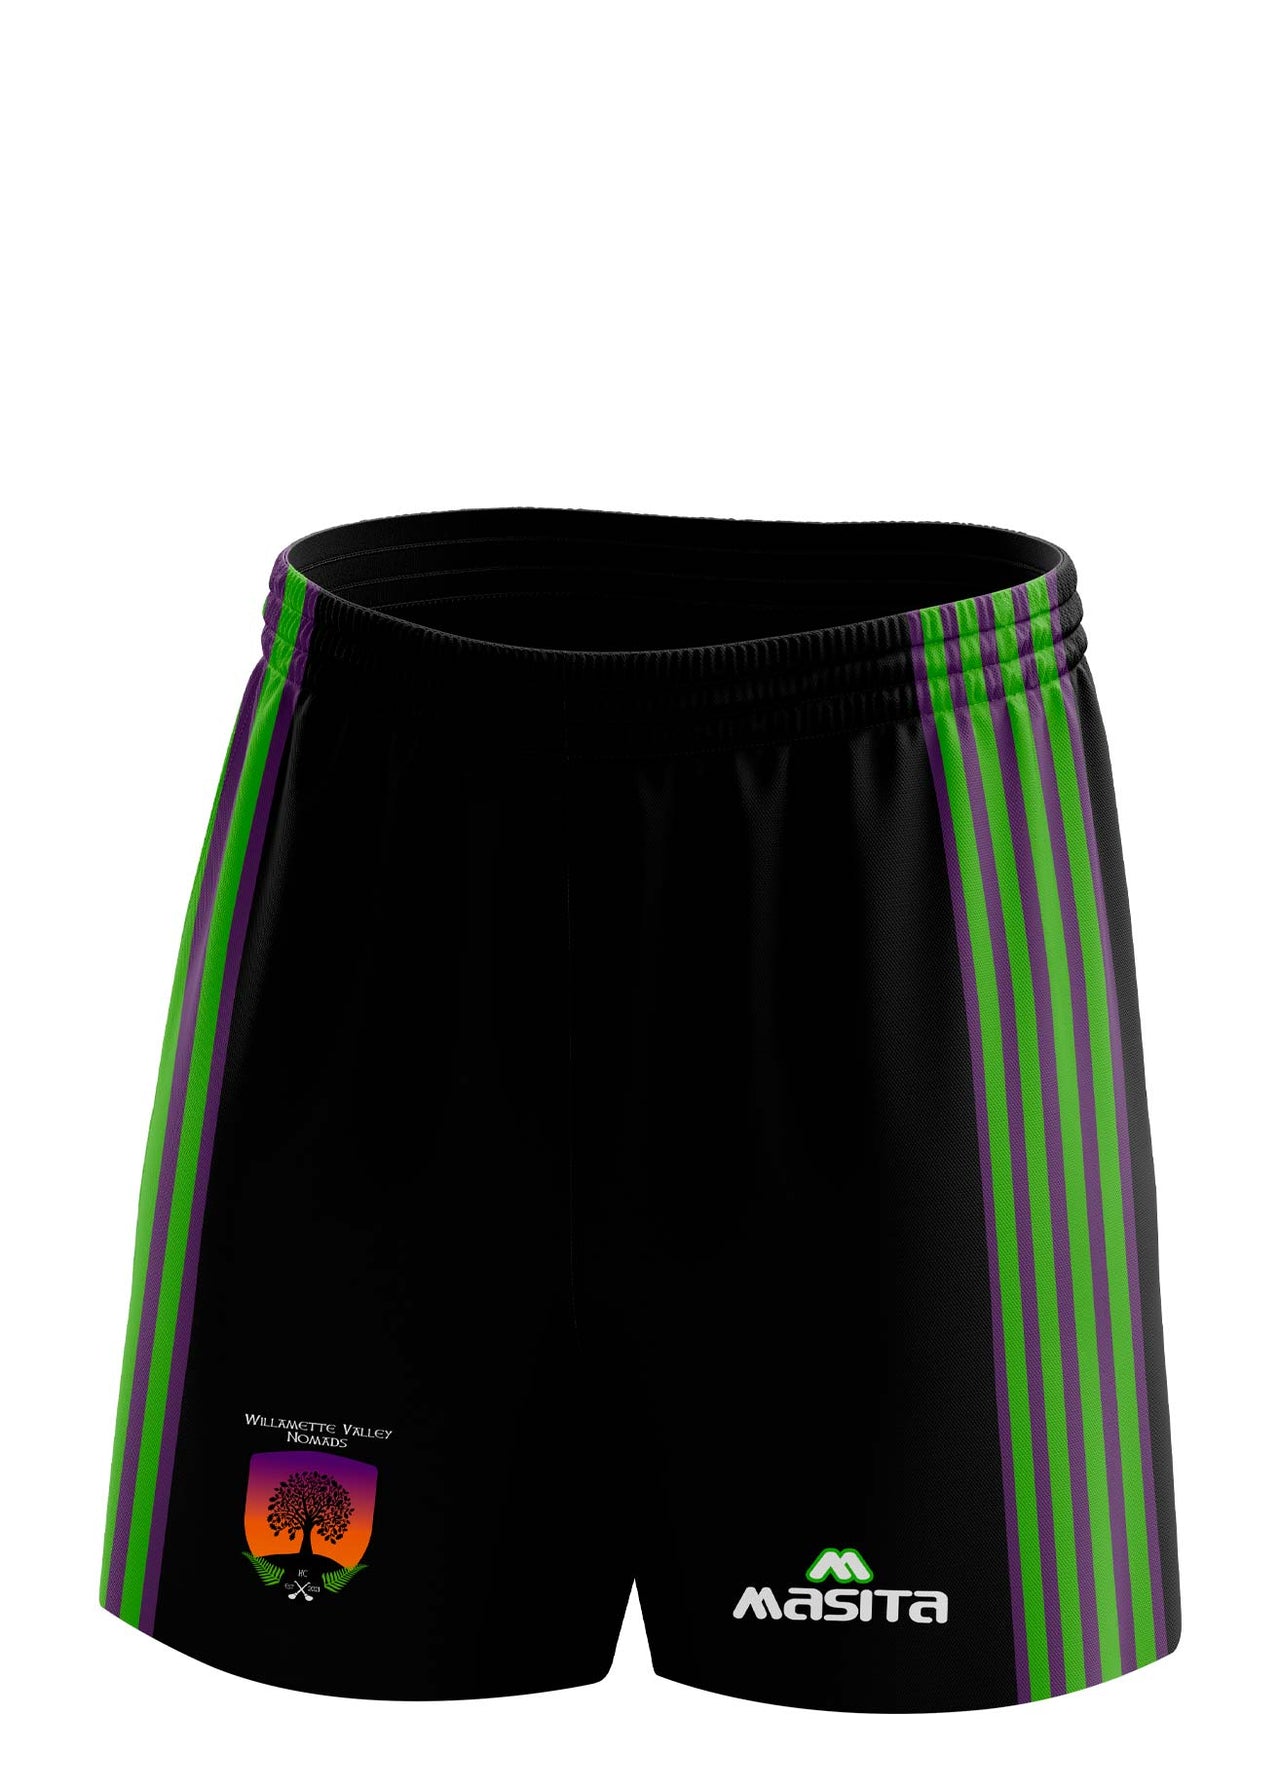 Willamette Valley Nomads Training Shorts Adult